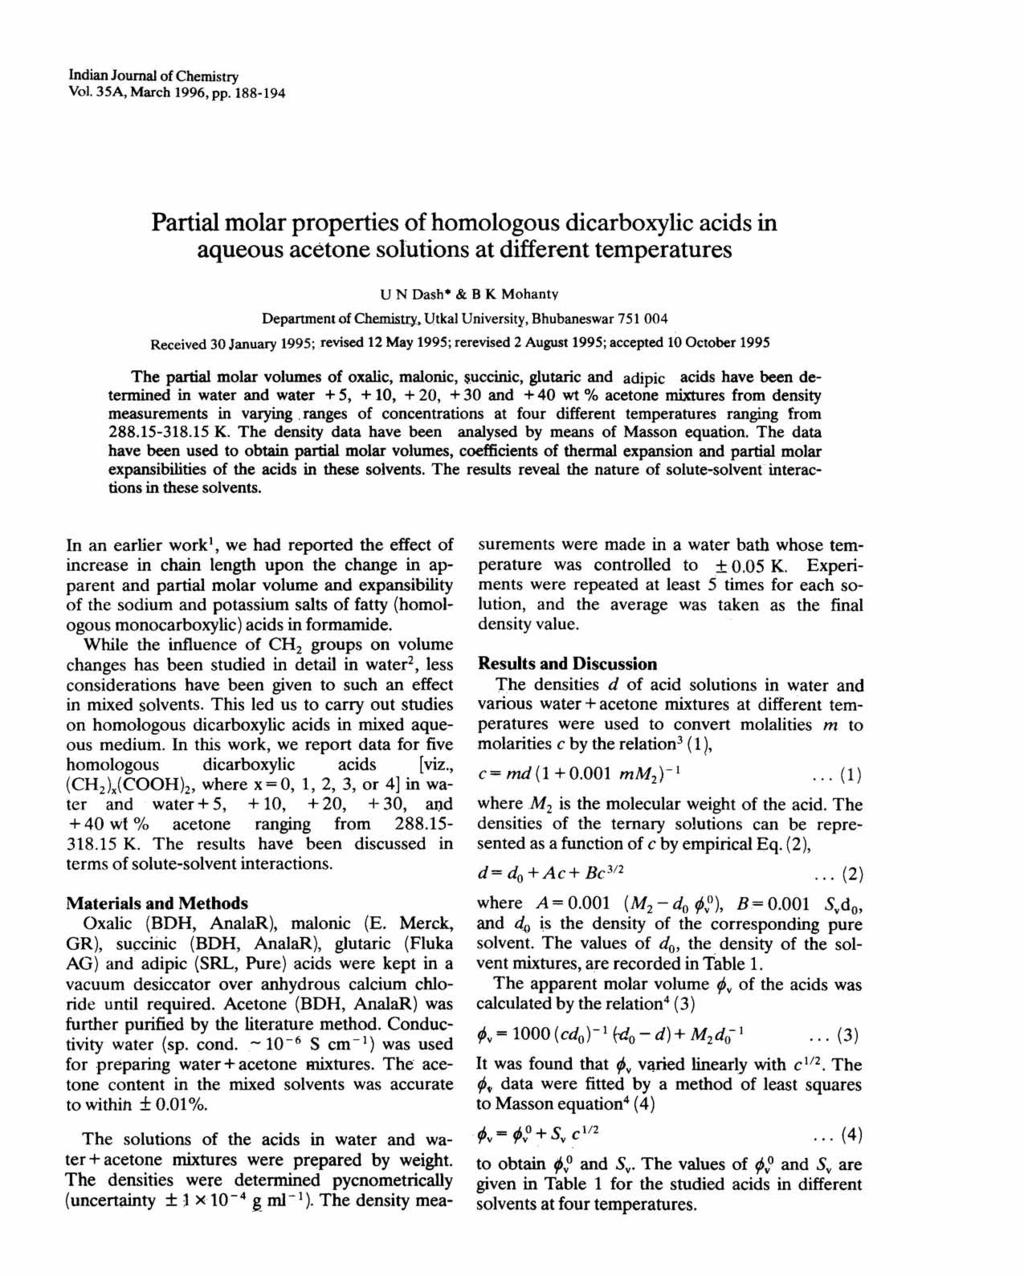 Indian Journal of Chemistry Vol. 35A, March 1996, pp.